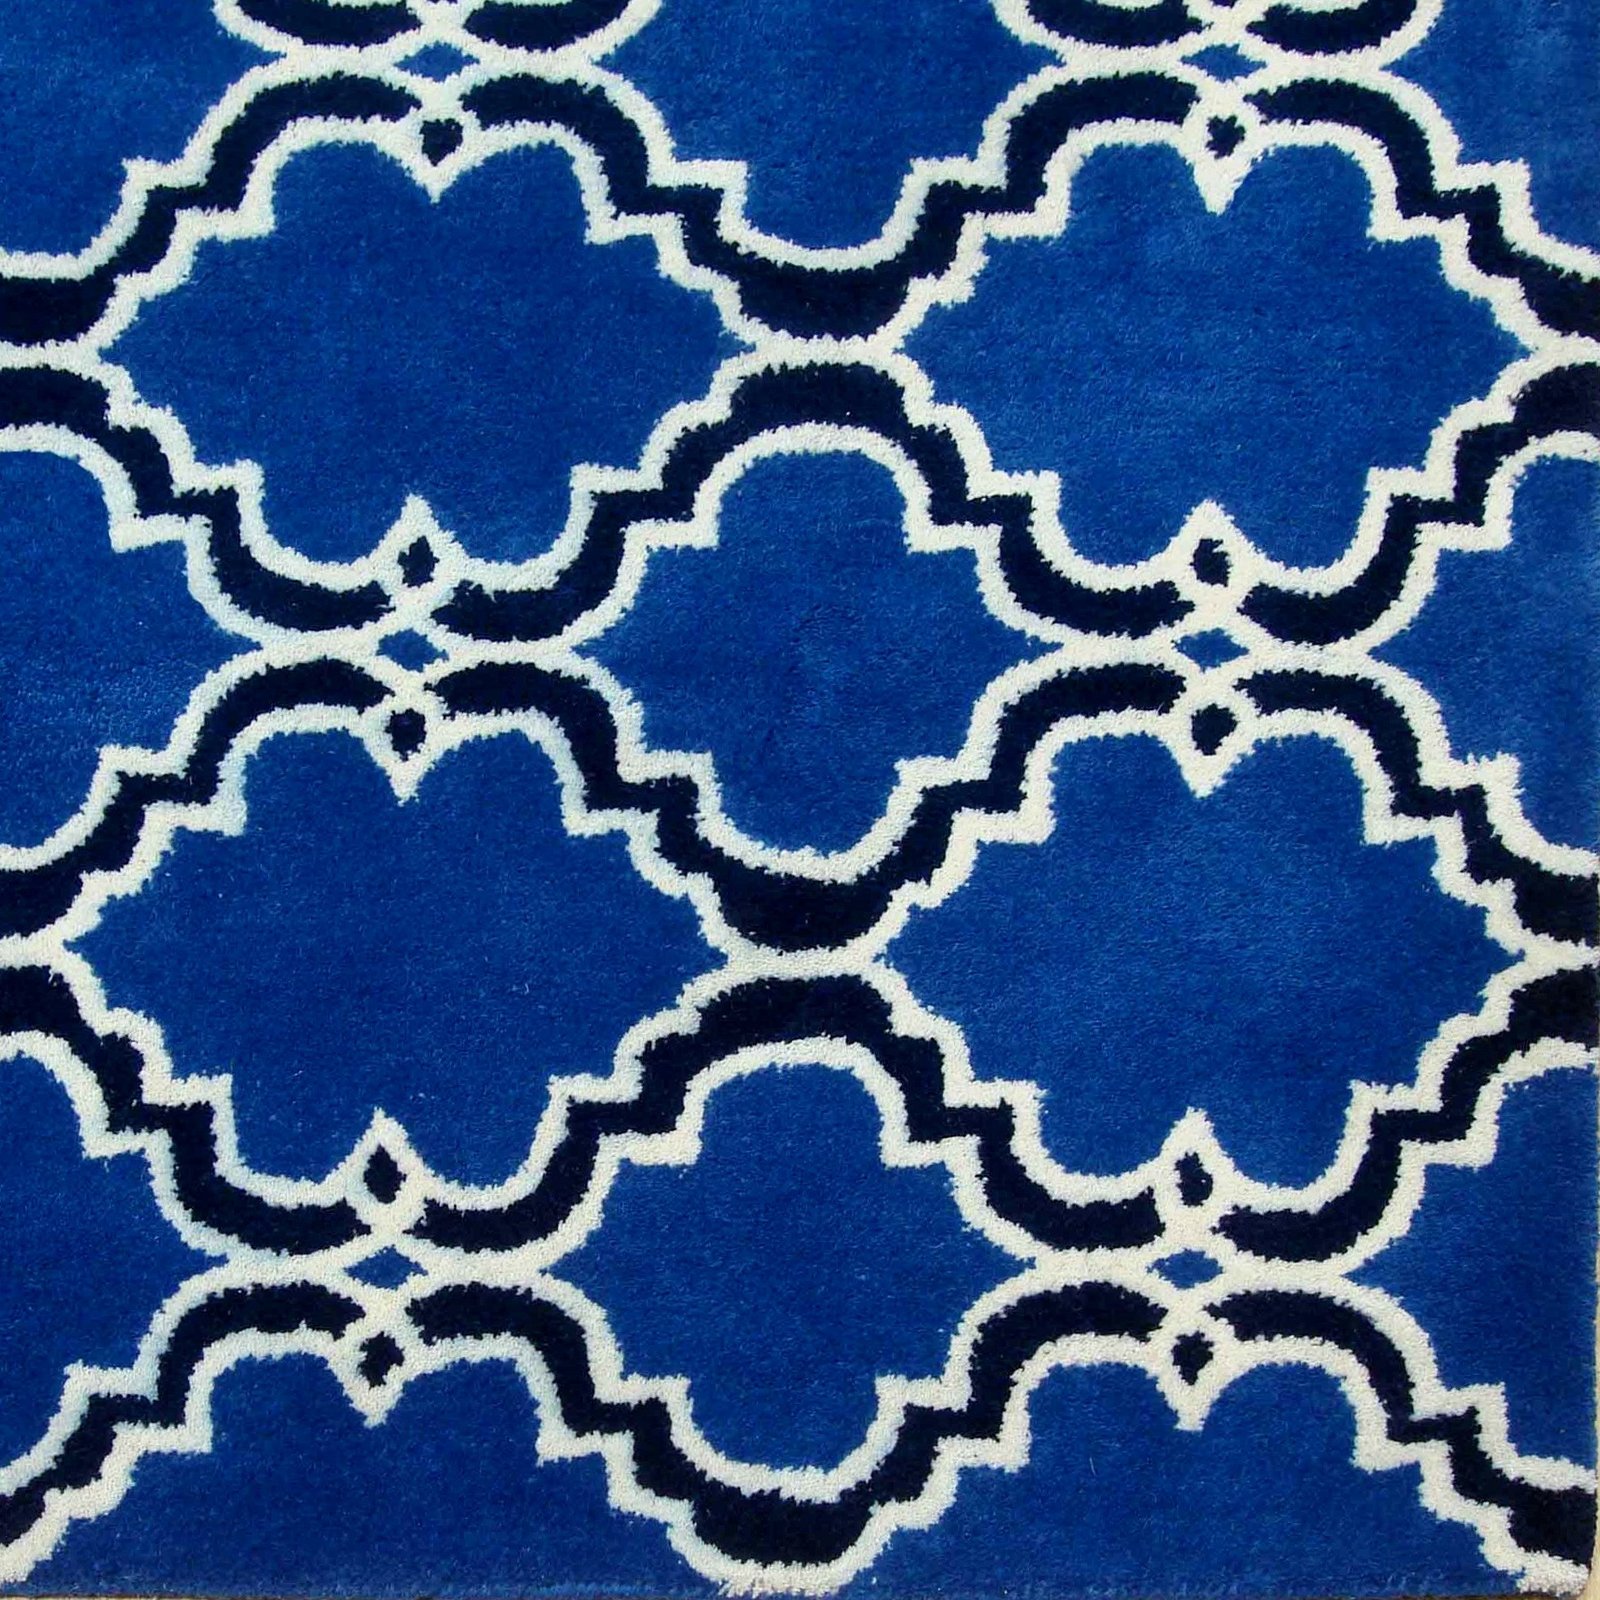 Primary image for Moroccan Scroll Tile Indigo Handmade Persian Style Woolen Area Rug - 8' x 10'